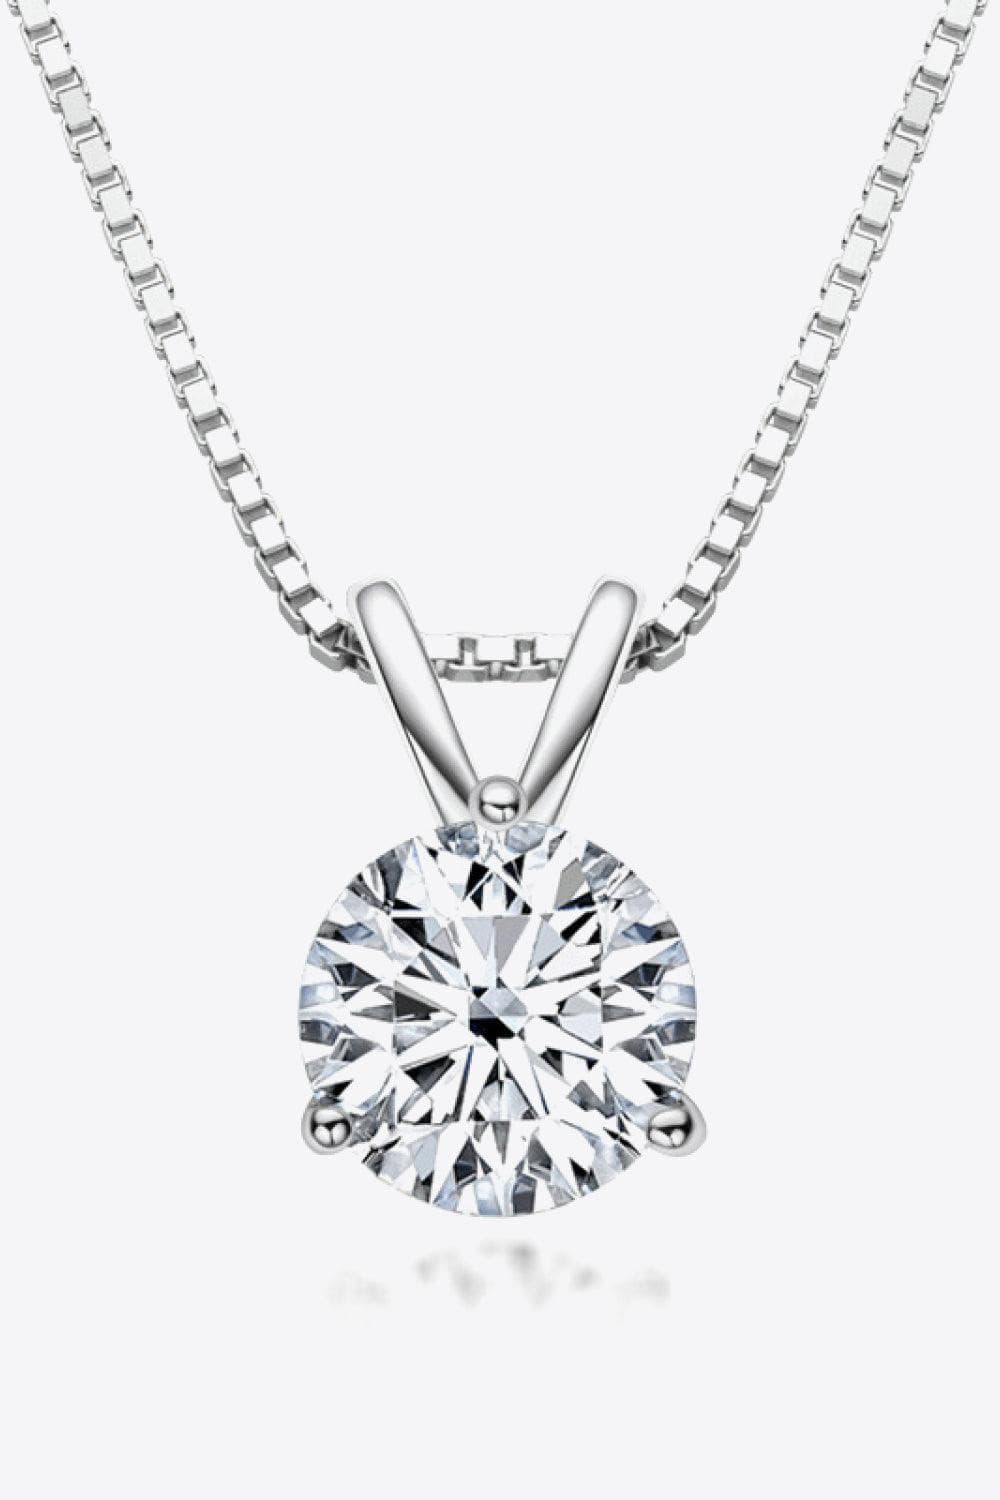 Timeless 1 Carat Platinum-Plated 925 Sterling Silver Moissanite Pendant Necklace - Jessica Carlson